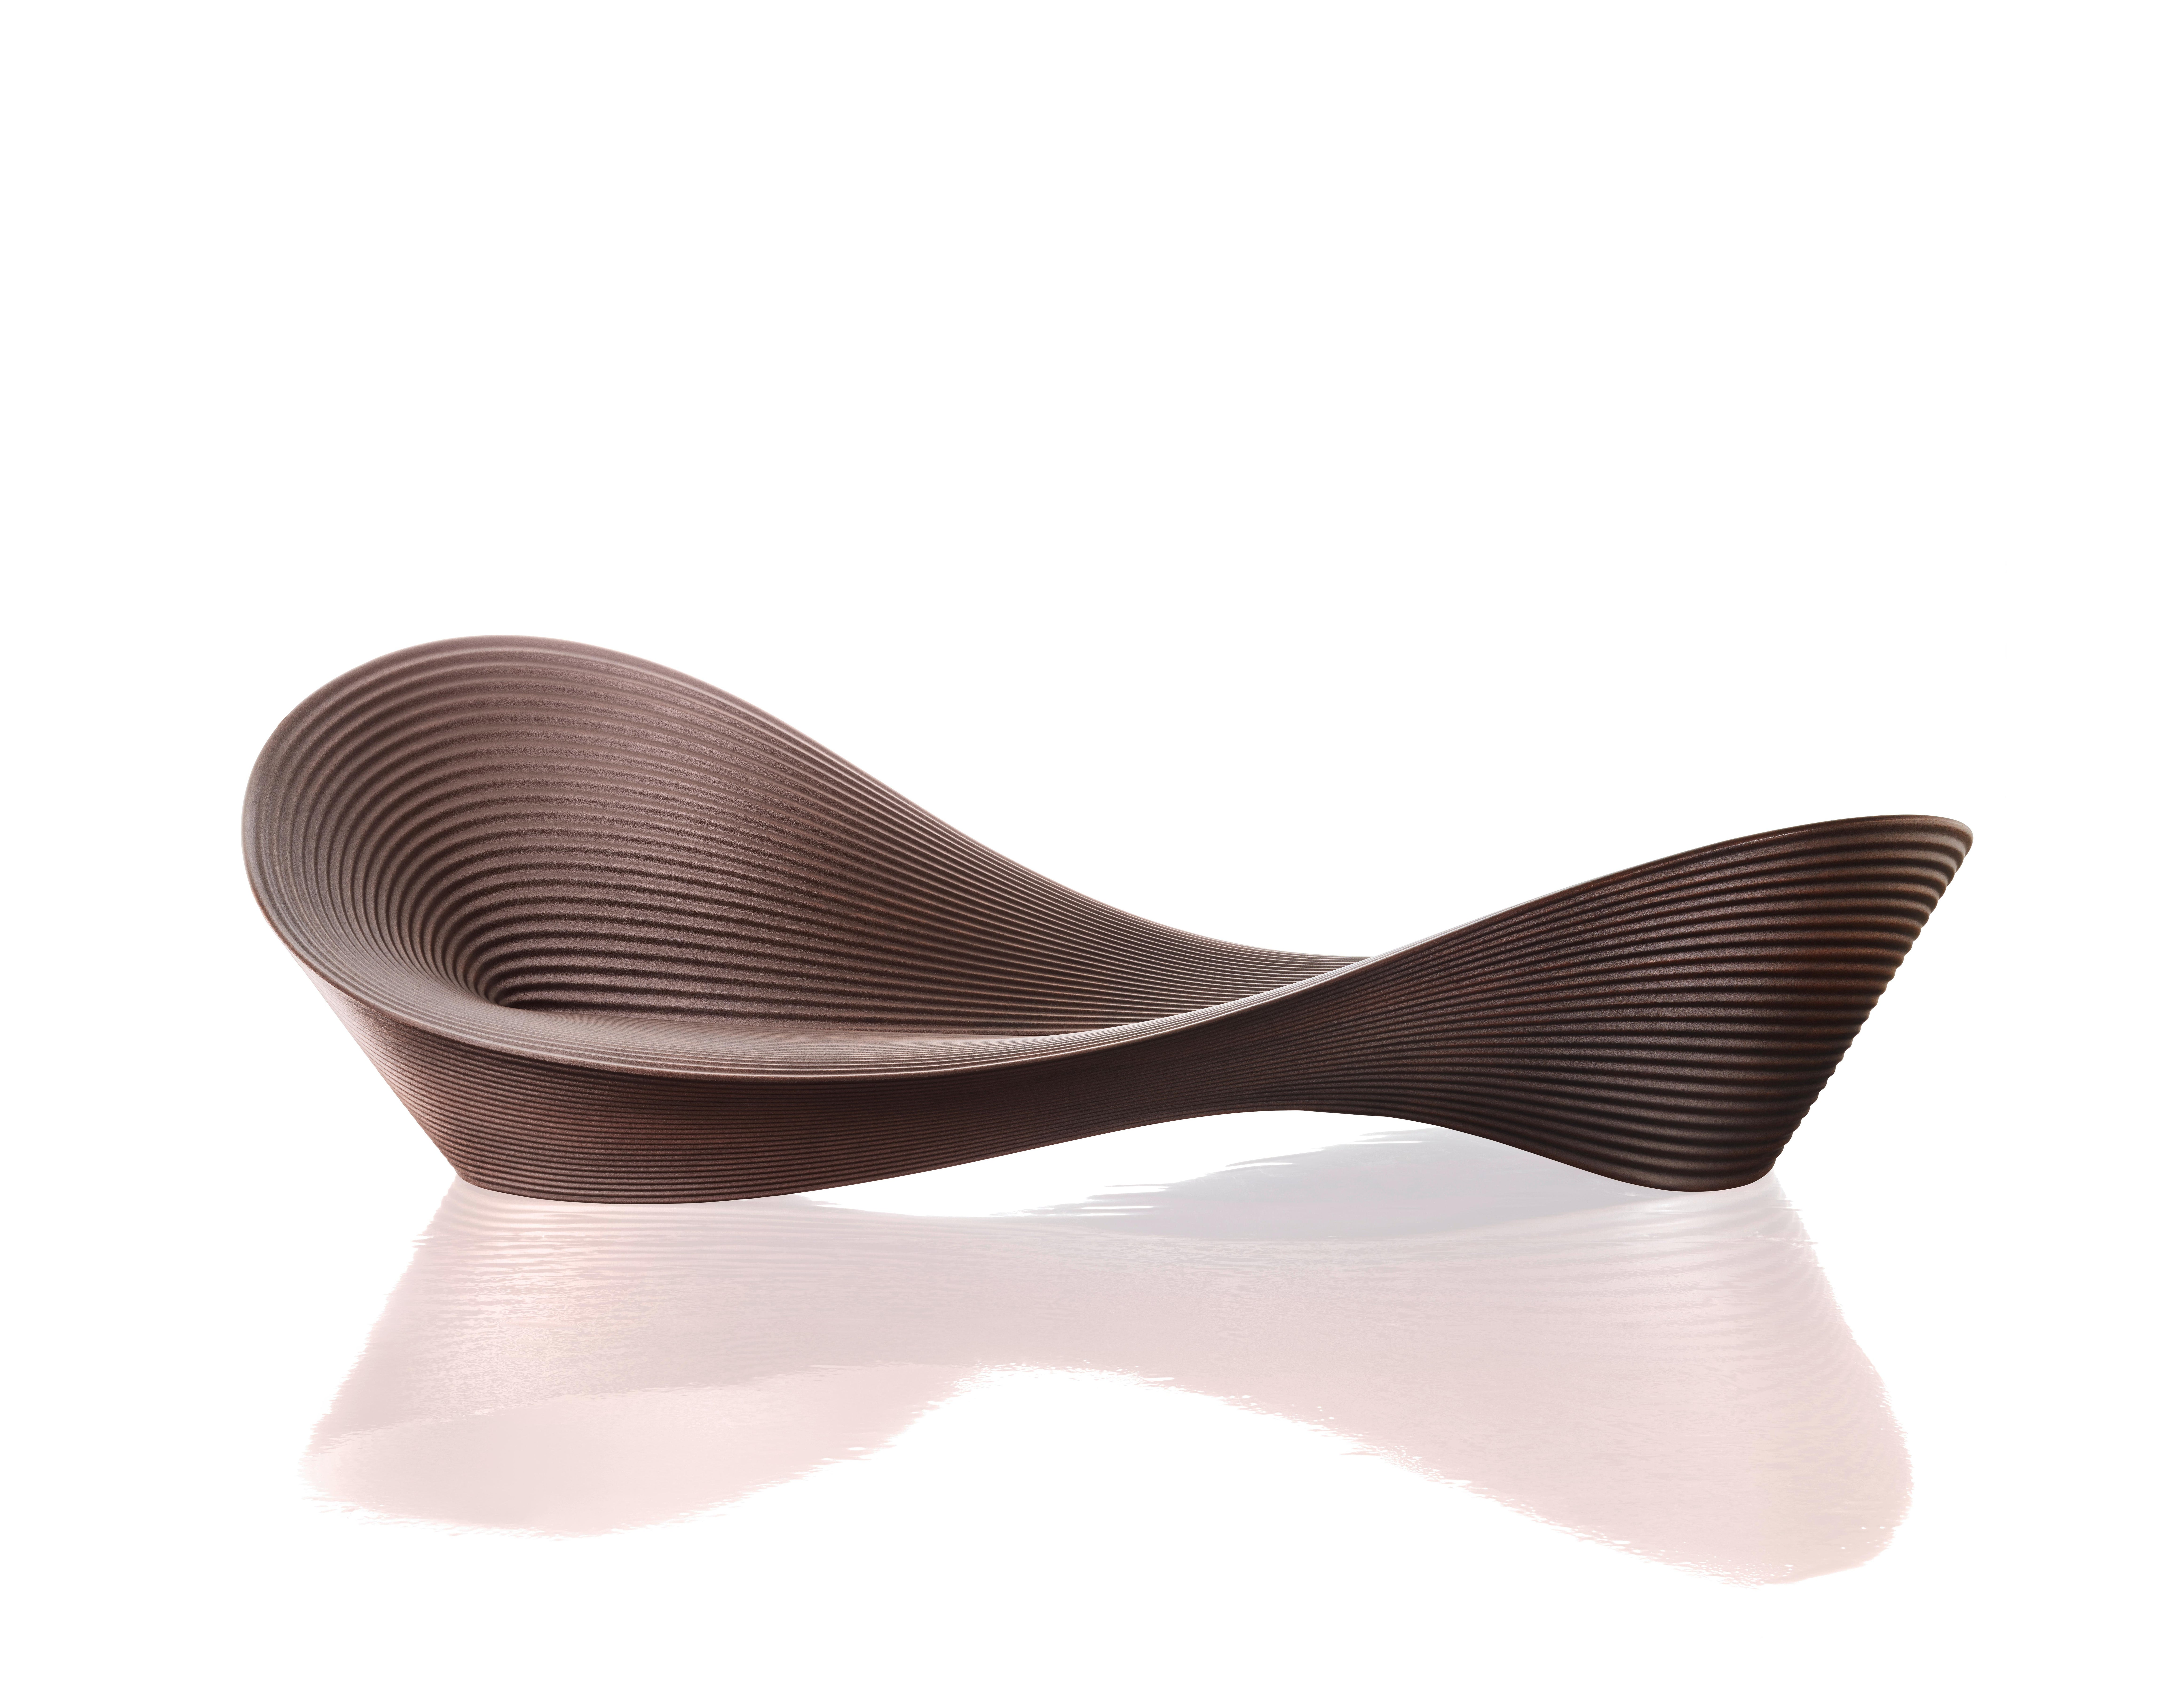 Item of furniture or sculpture? Folly bench expresses both these spirits in its dy- namic, flowing form, inspired by nature. Equally artistic and functional, it is made
of rotational-moulded polyethylene, and comes in a brown colour reminiscent of